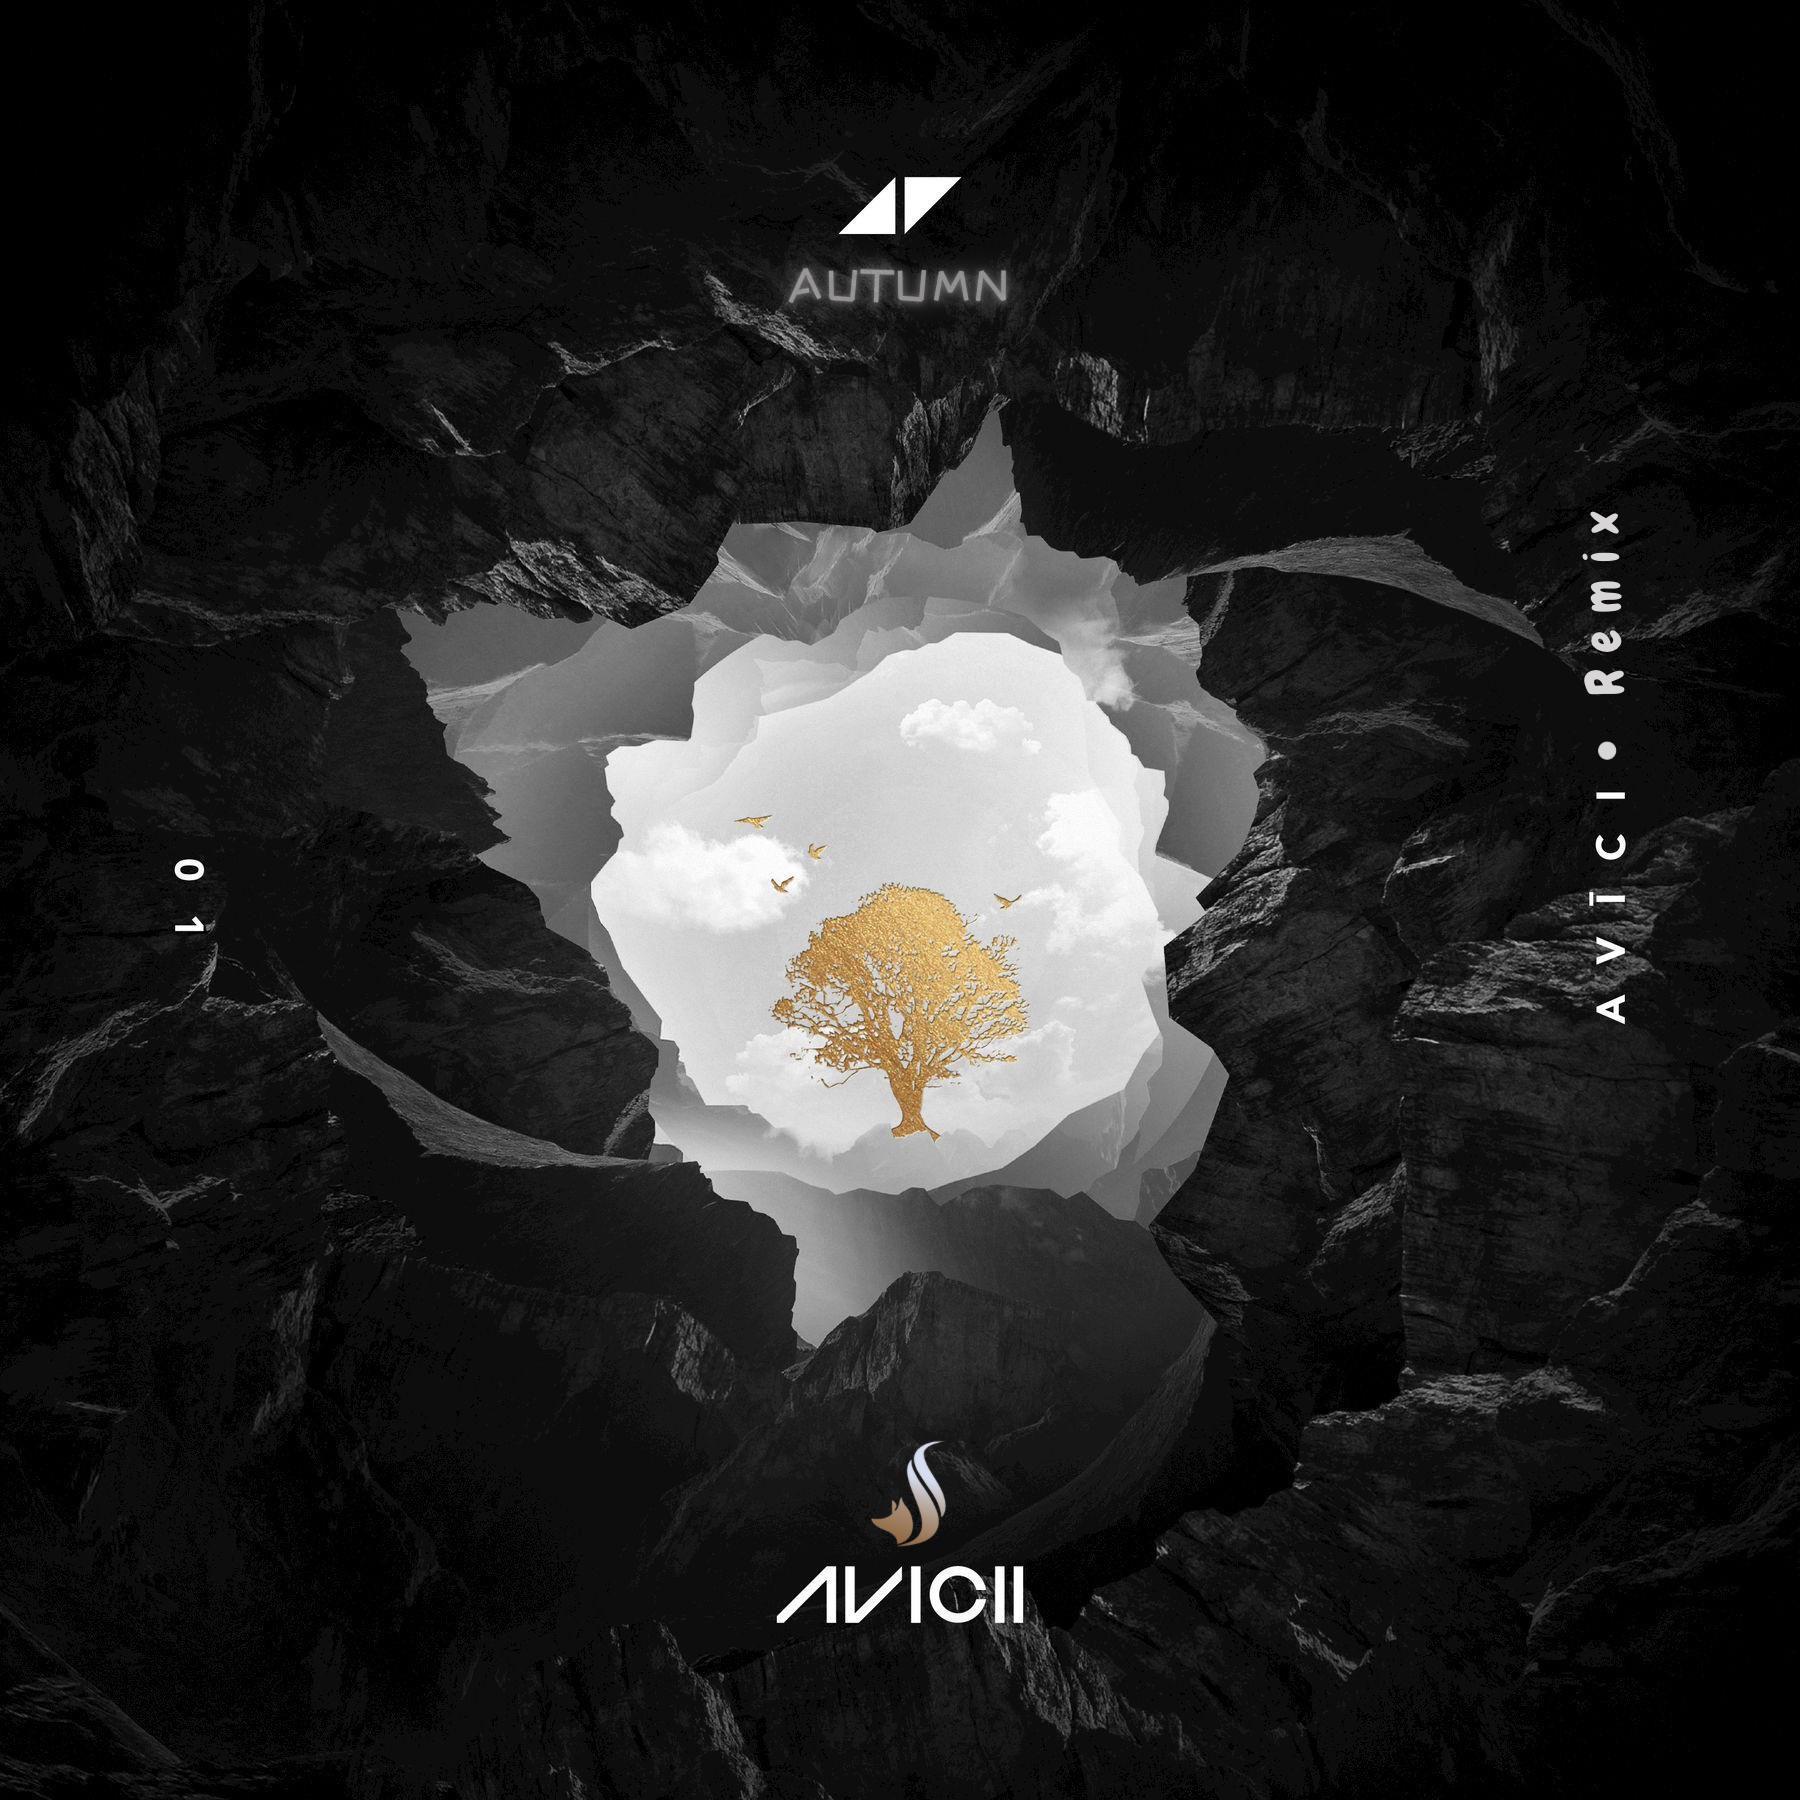 Without you歌词 歌手Autumn / Avicii-专辑Without you-单曲《Without you》LRC歌词下载